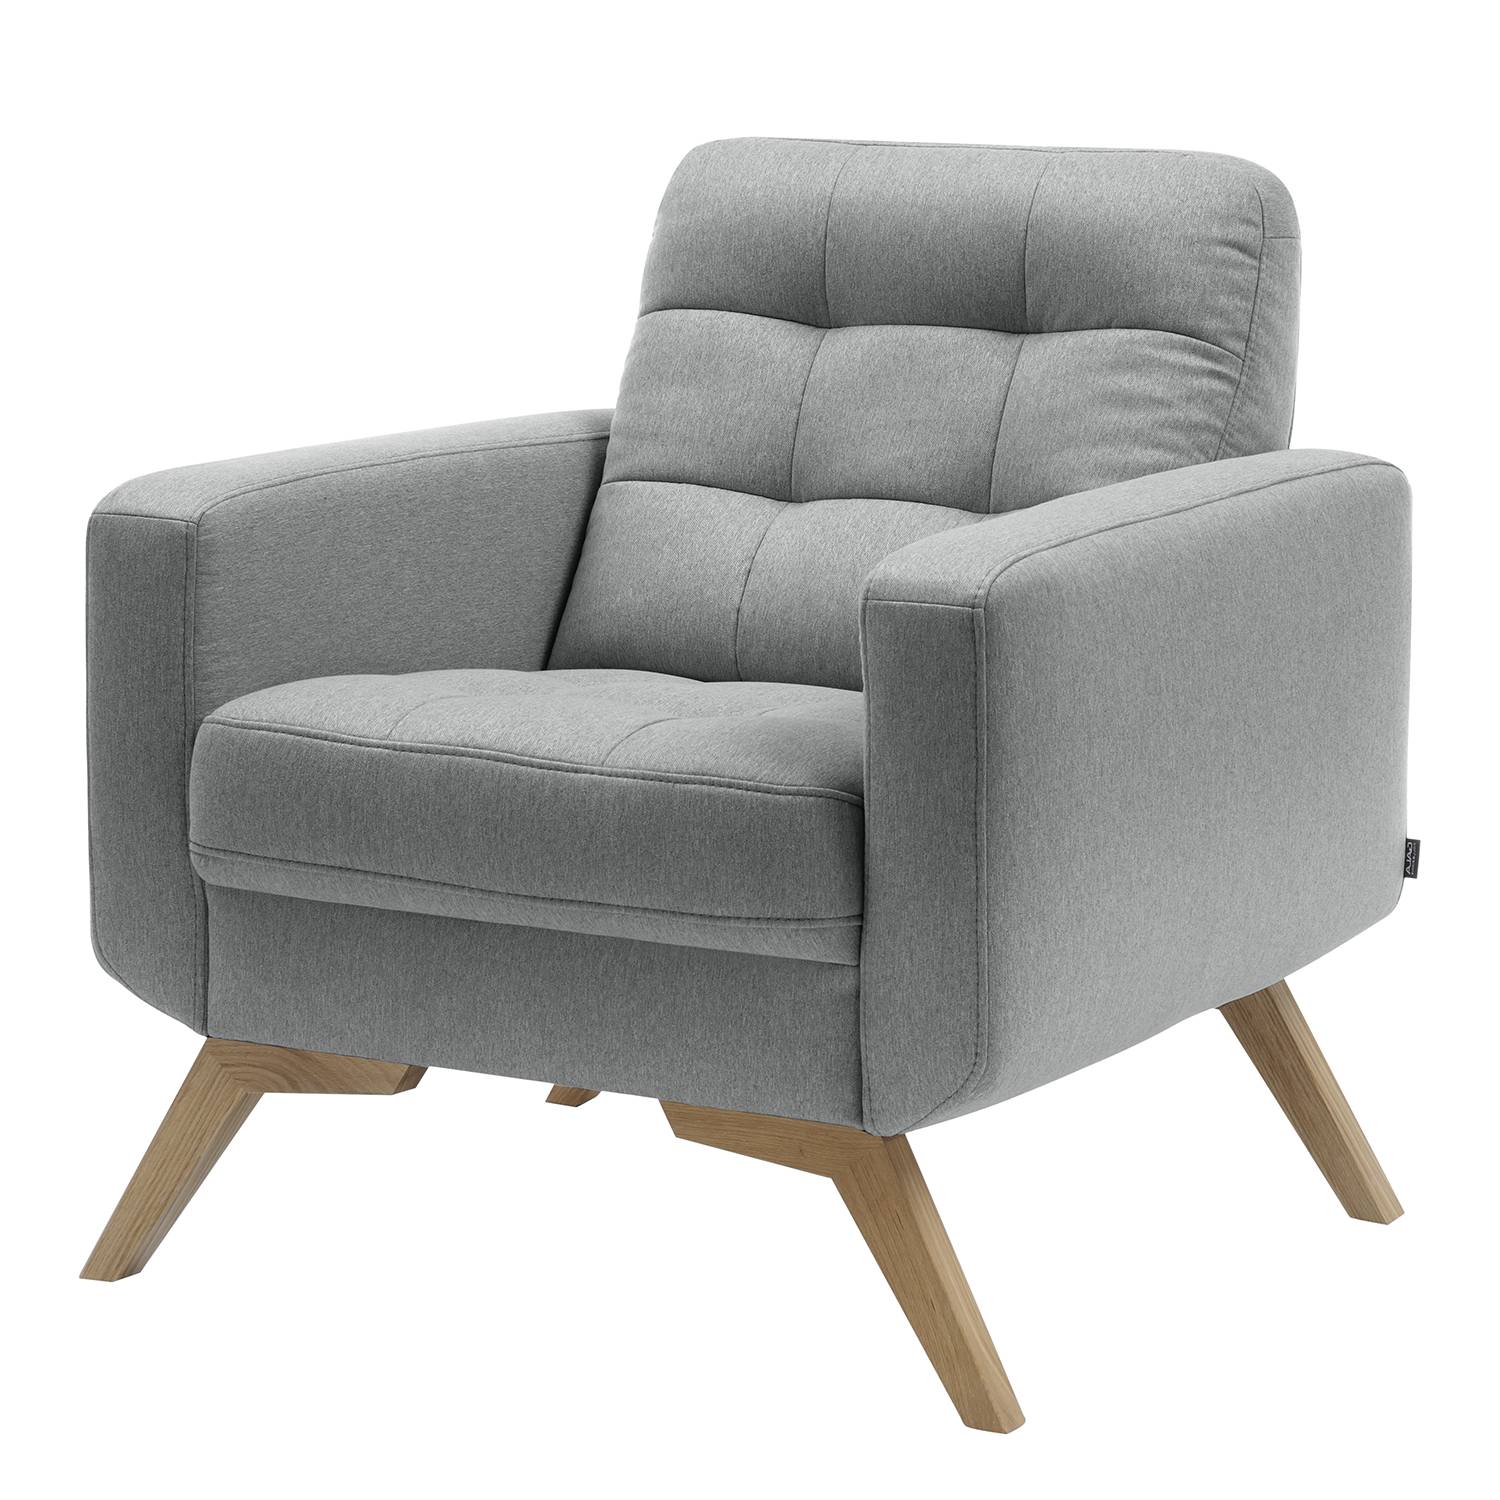 Image of Fauteuil Somoto 000000001000128308